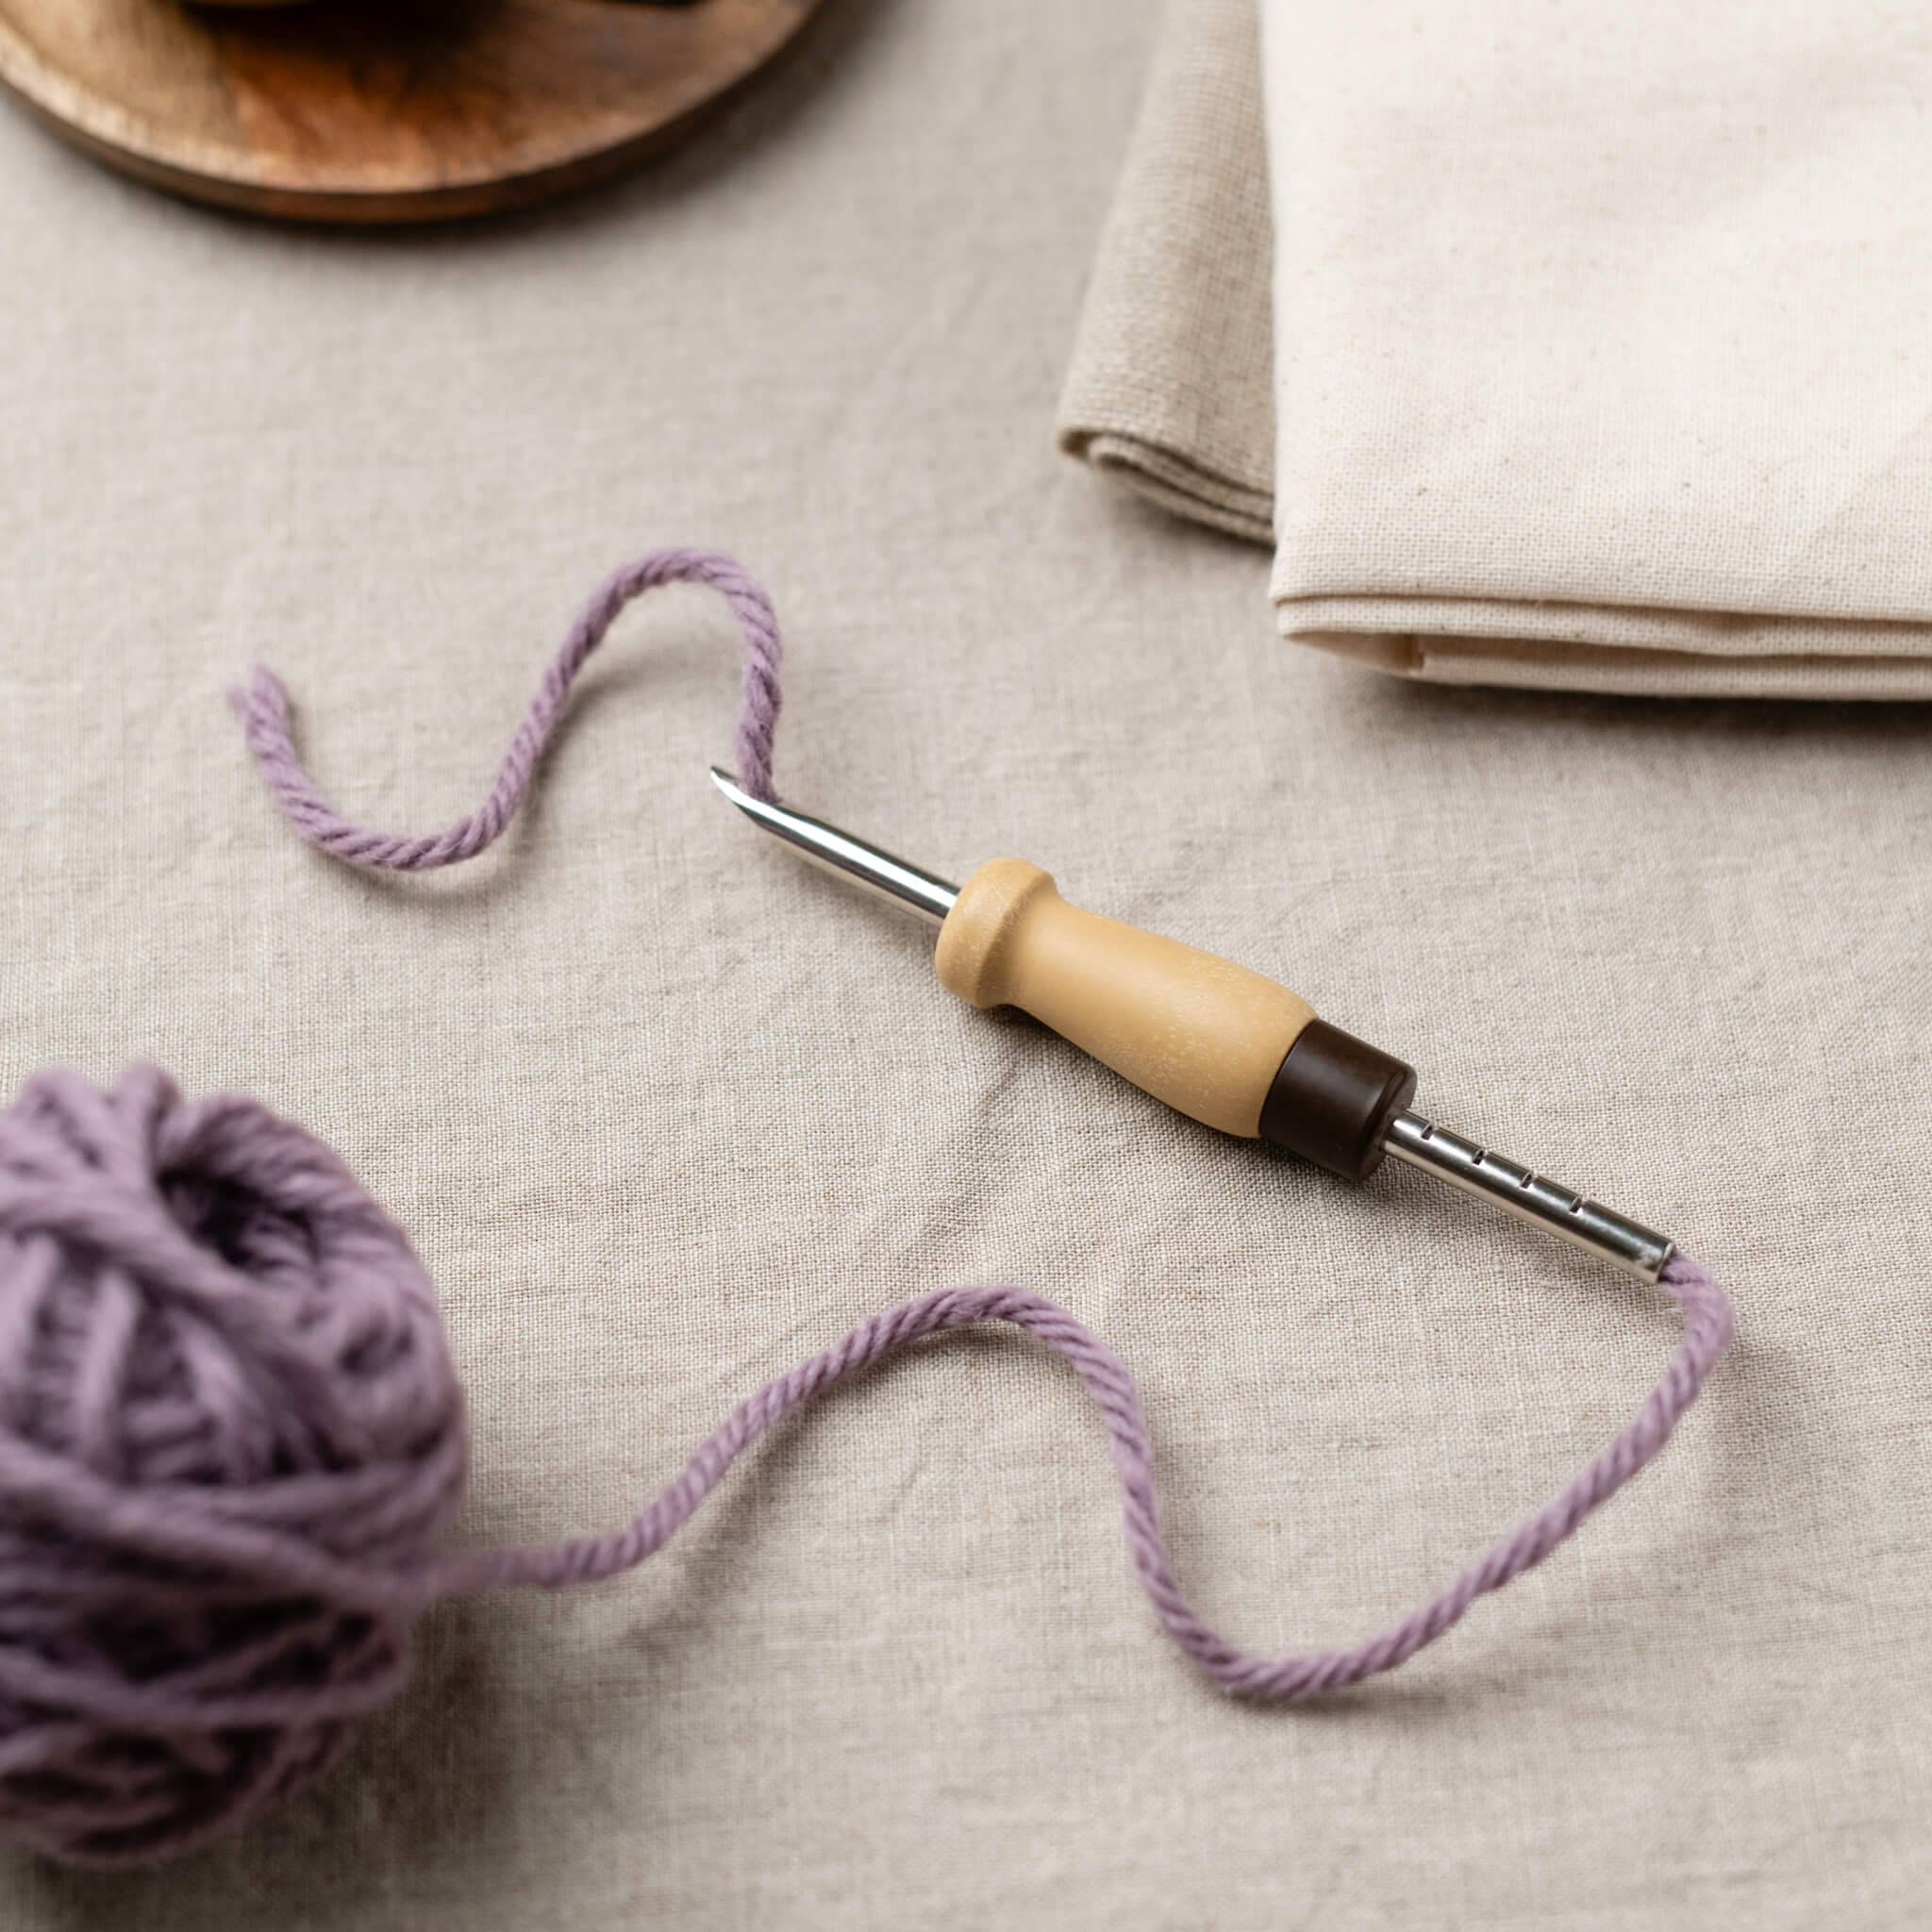 Lavor Punch Needle Holder and Threader, Knitting Book